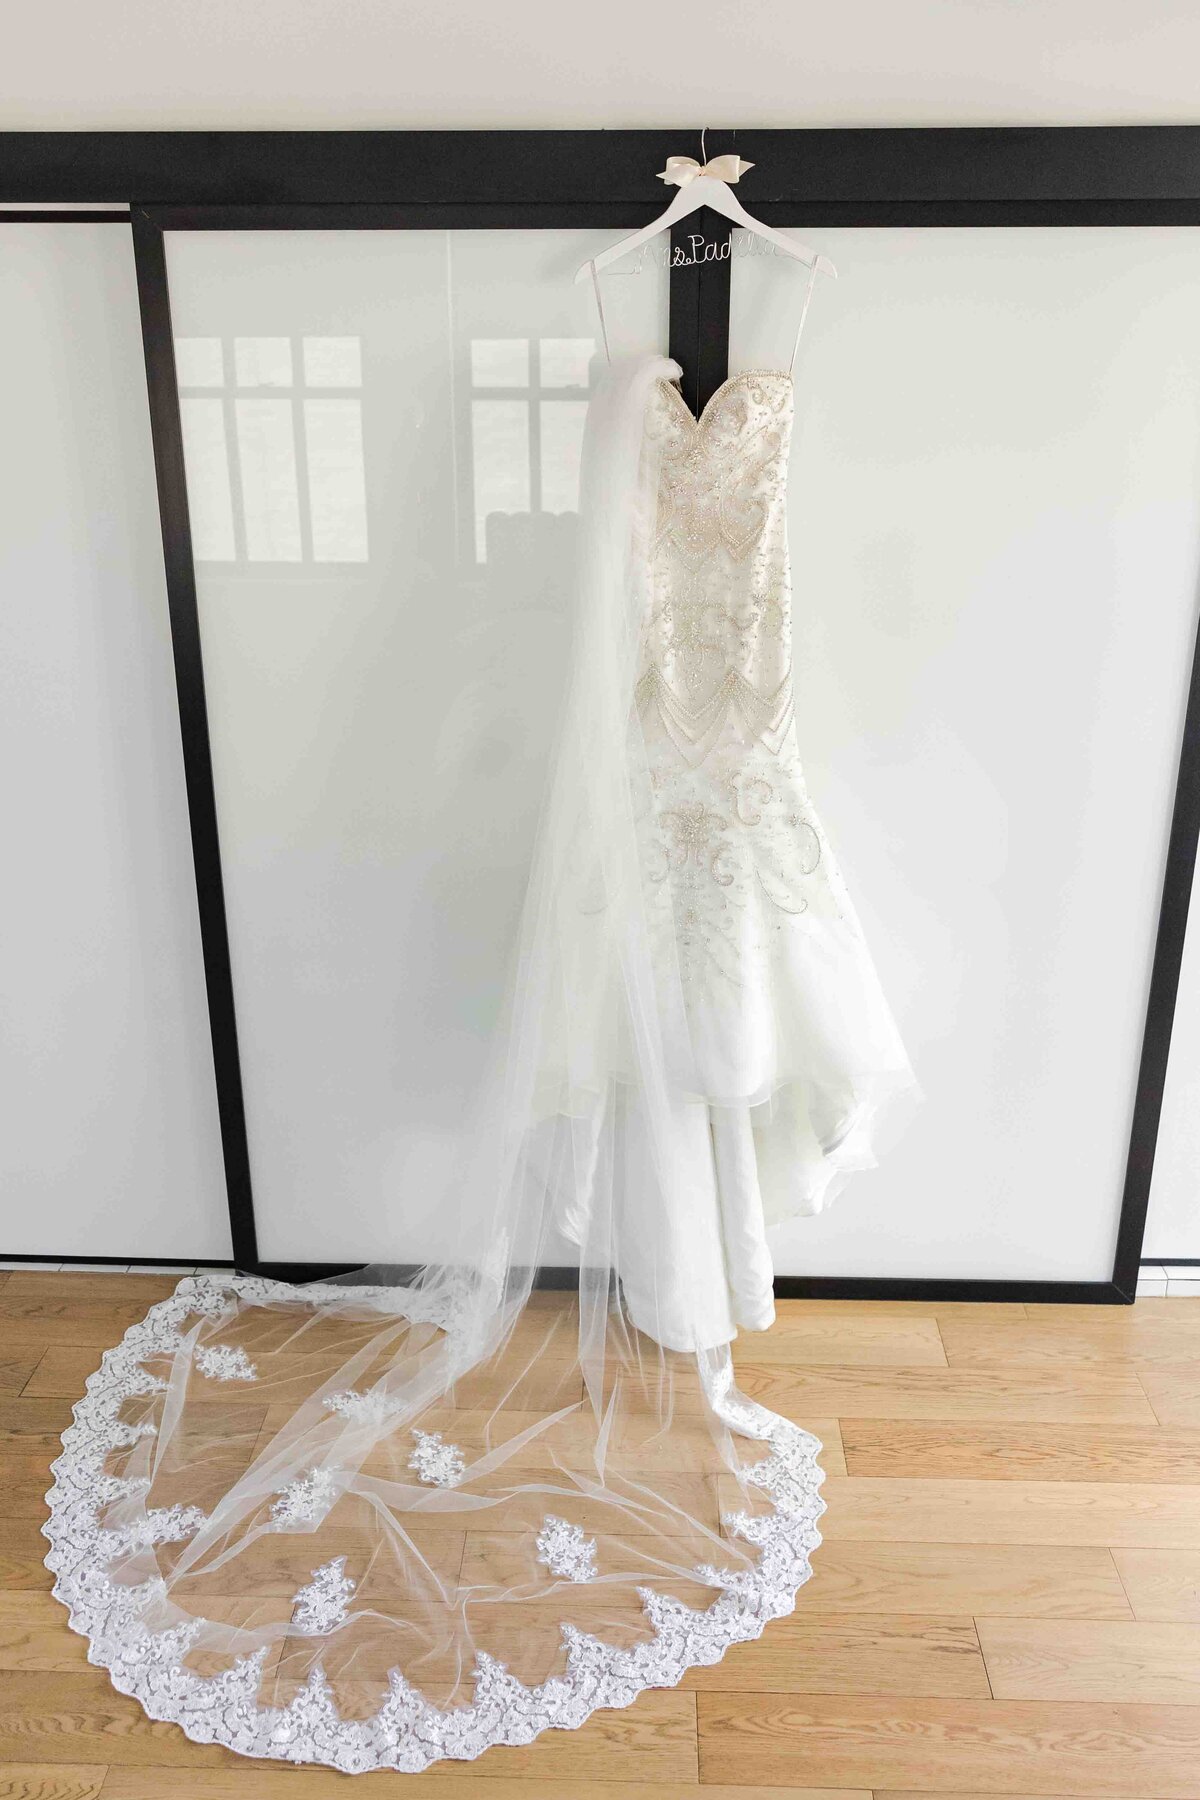 bridal-gown-hanging